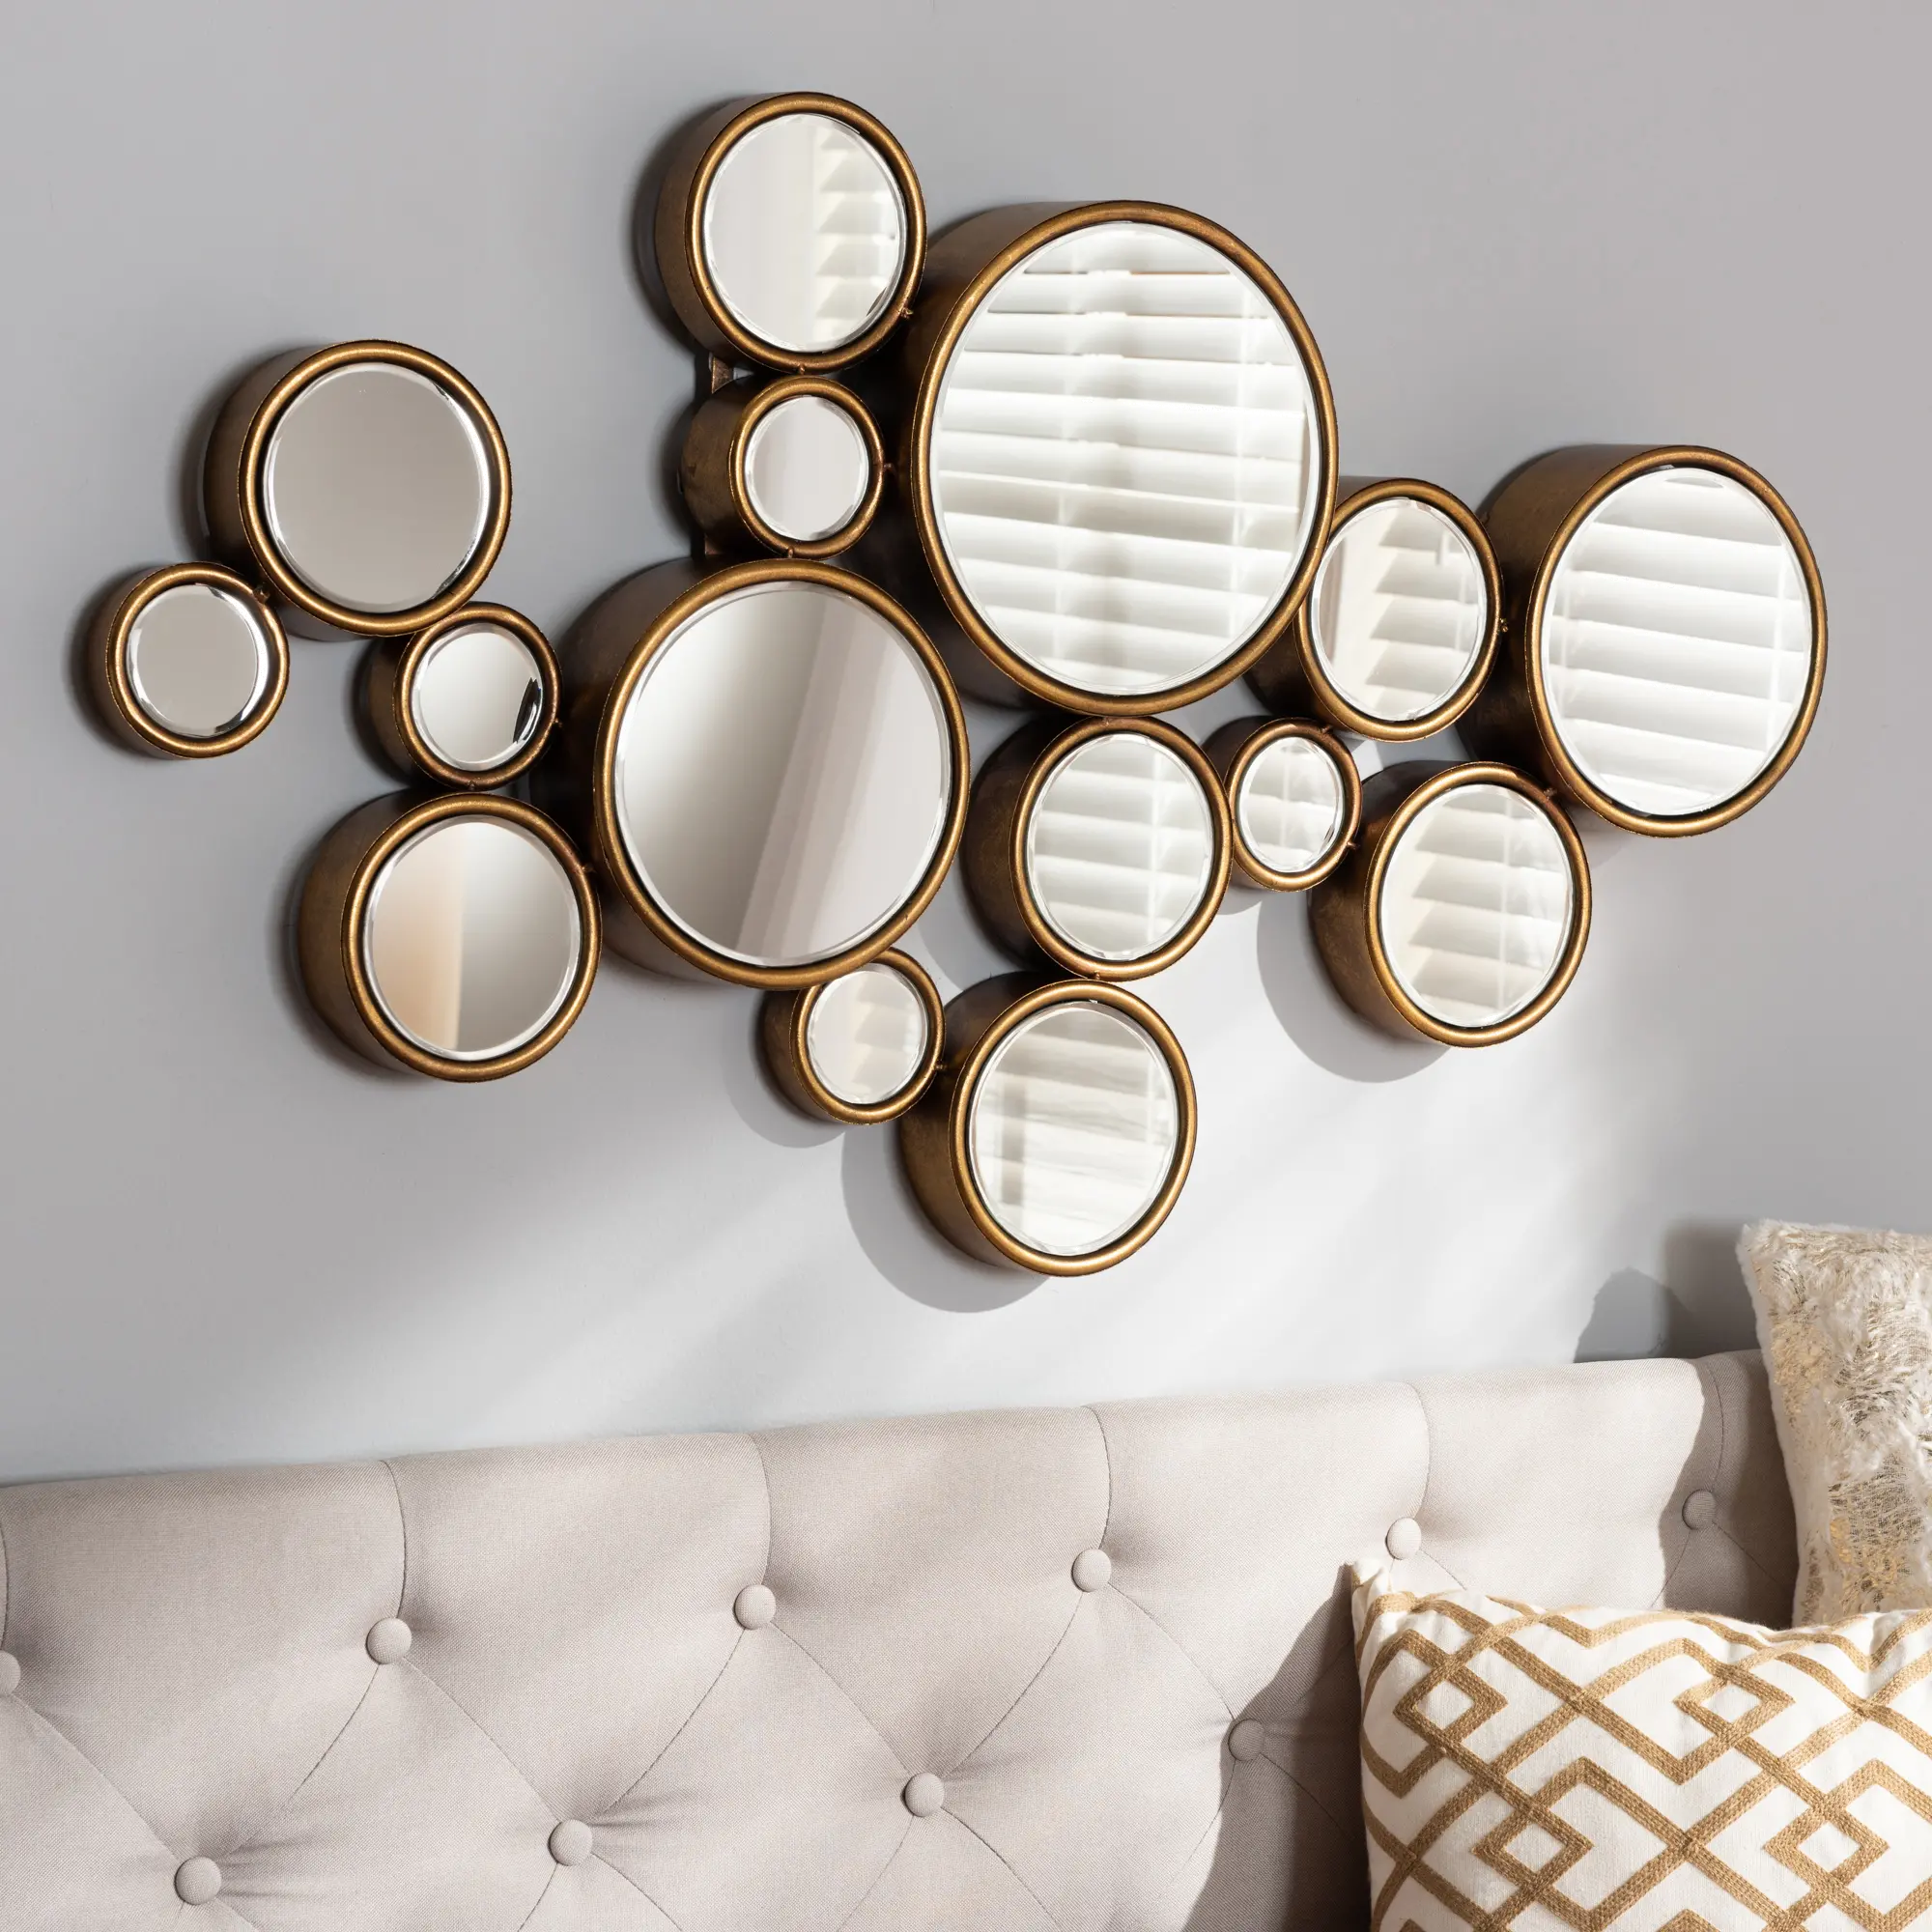 150-8881-RCW Contemporary Gold Bubble Accent Wall Mirror - Flor sku 150-8881-RCW